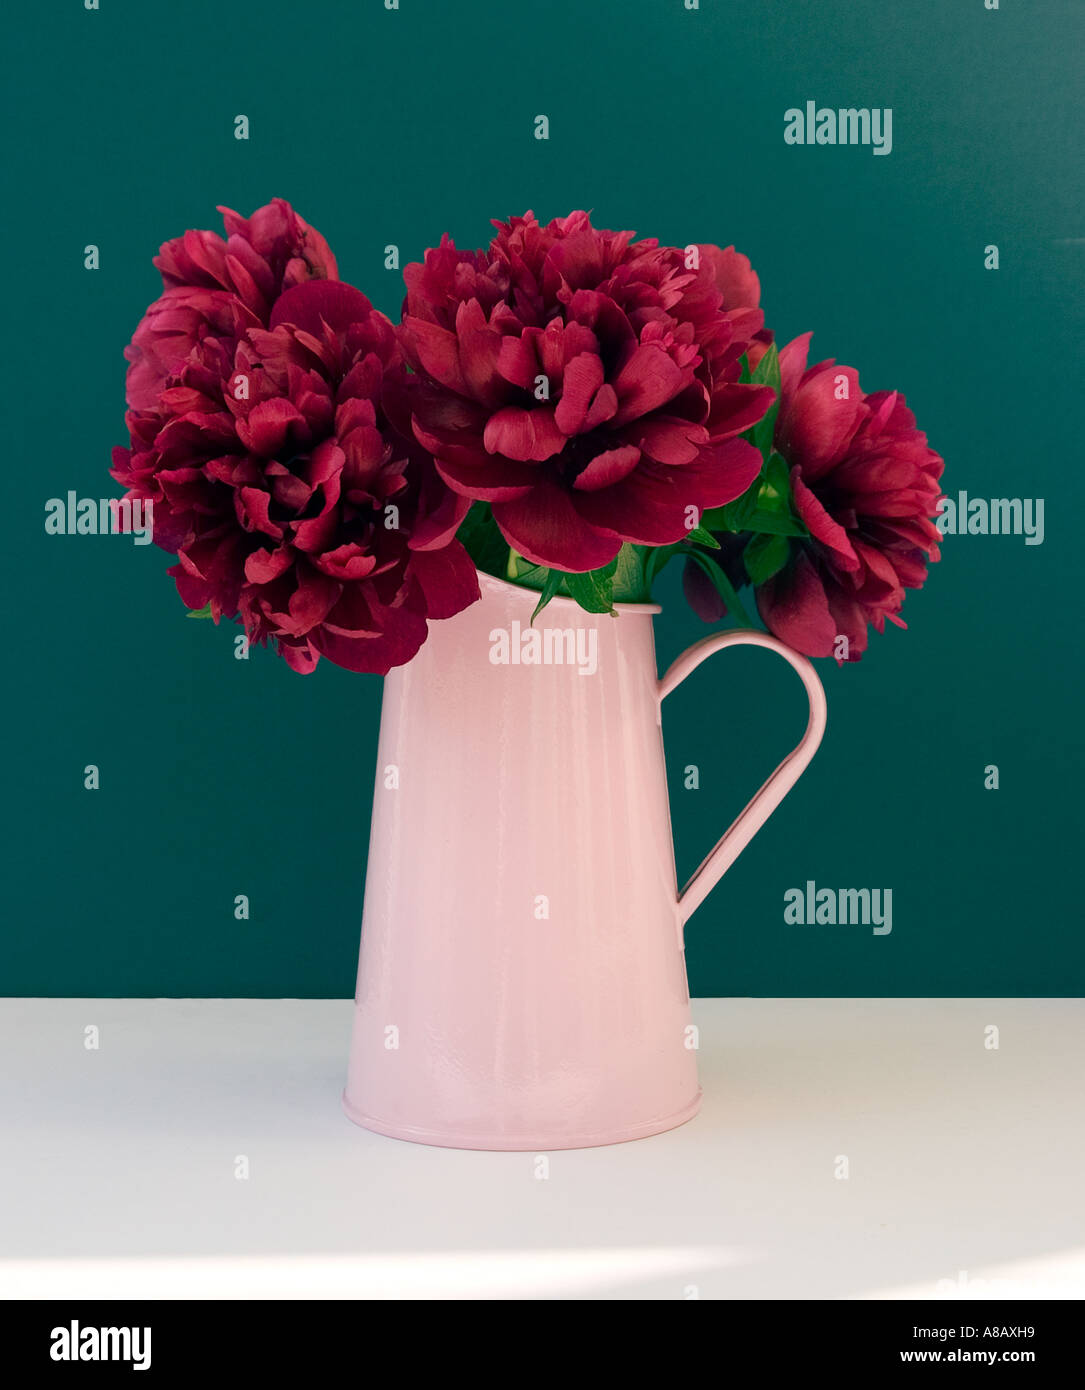 Peonies in a pink jug vase shot against a dark green background Stock Photo